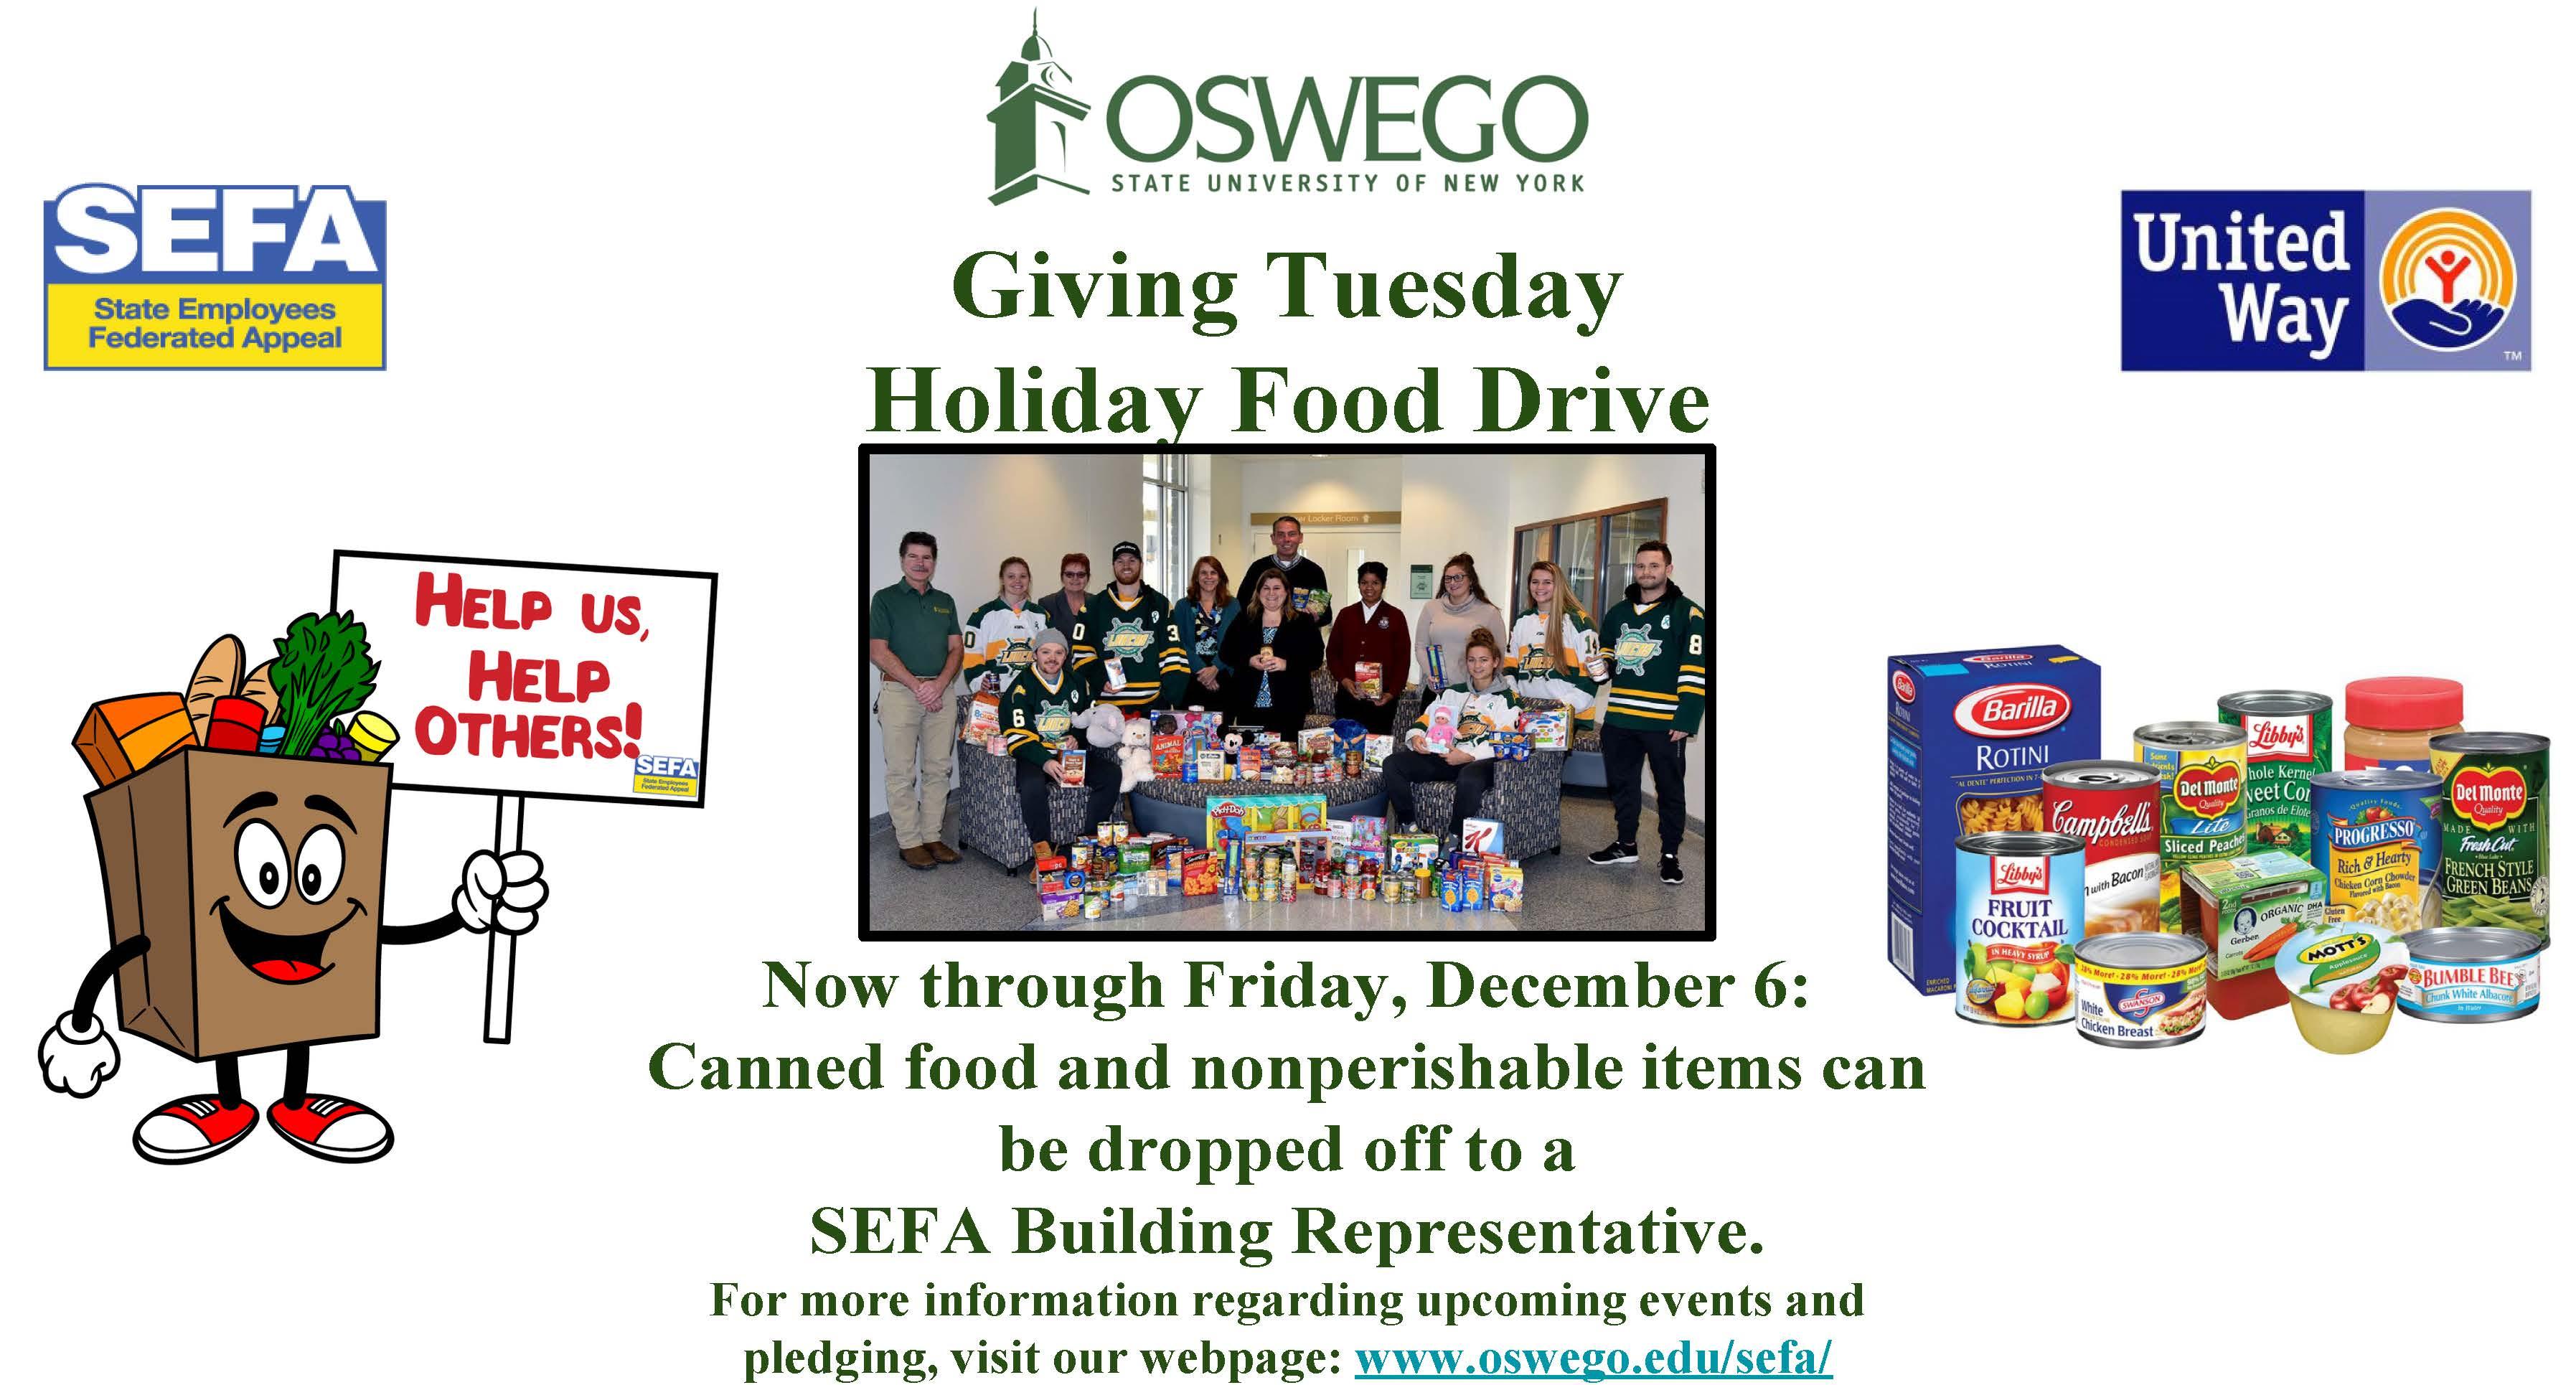 SEFA Giving Tuesday Holiday Food Drive - Now through Dec. 6th